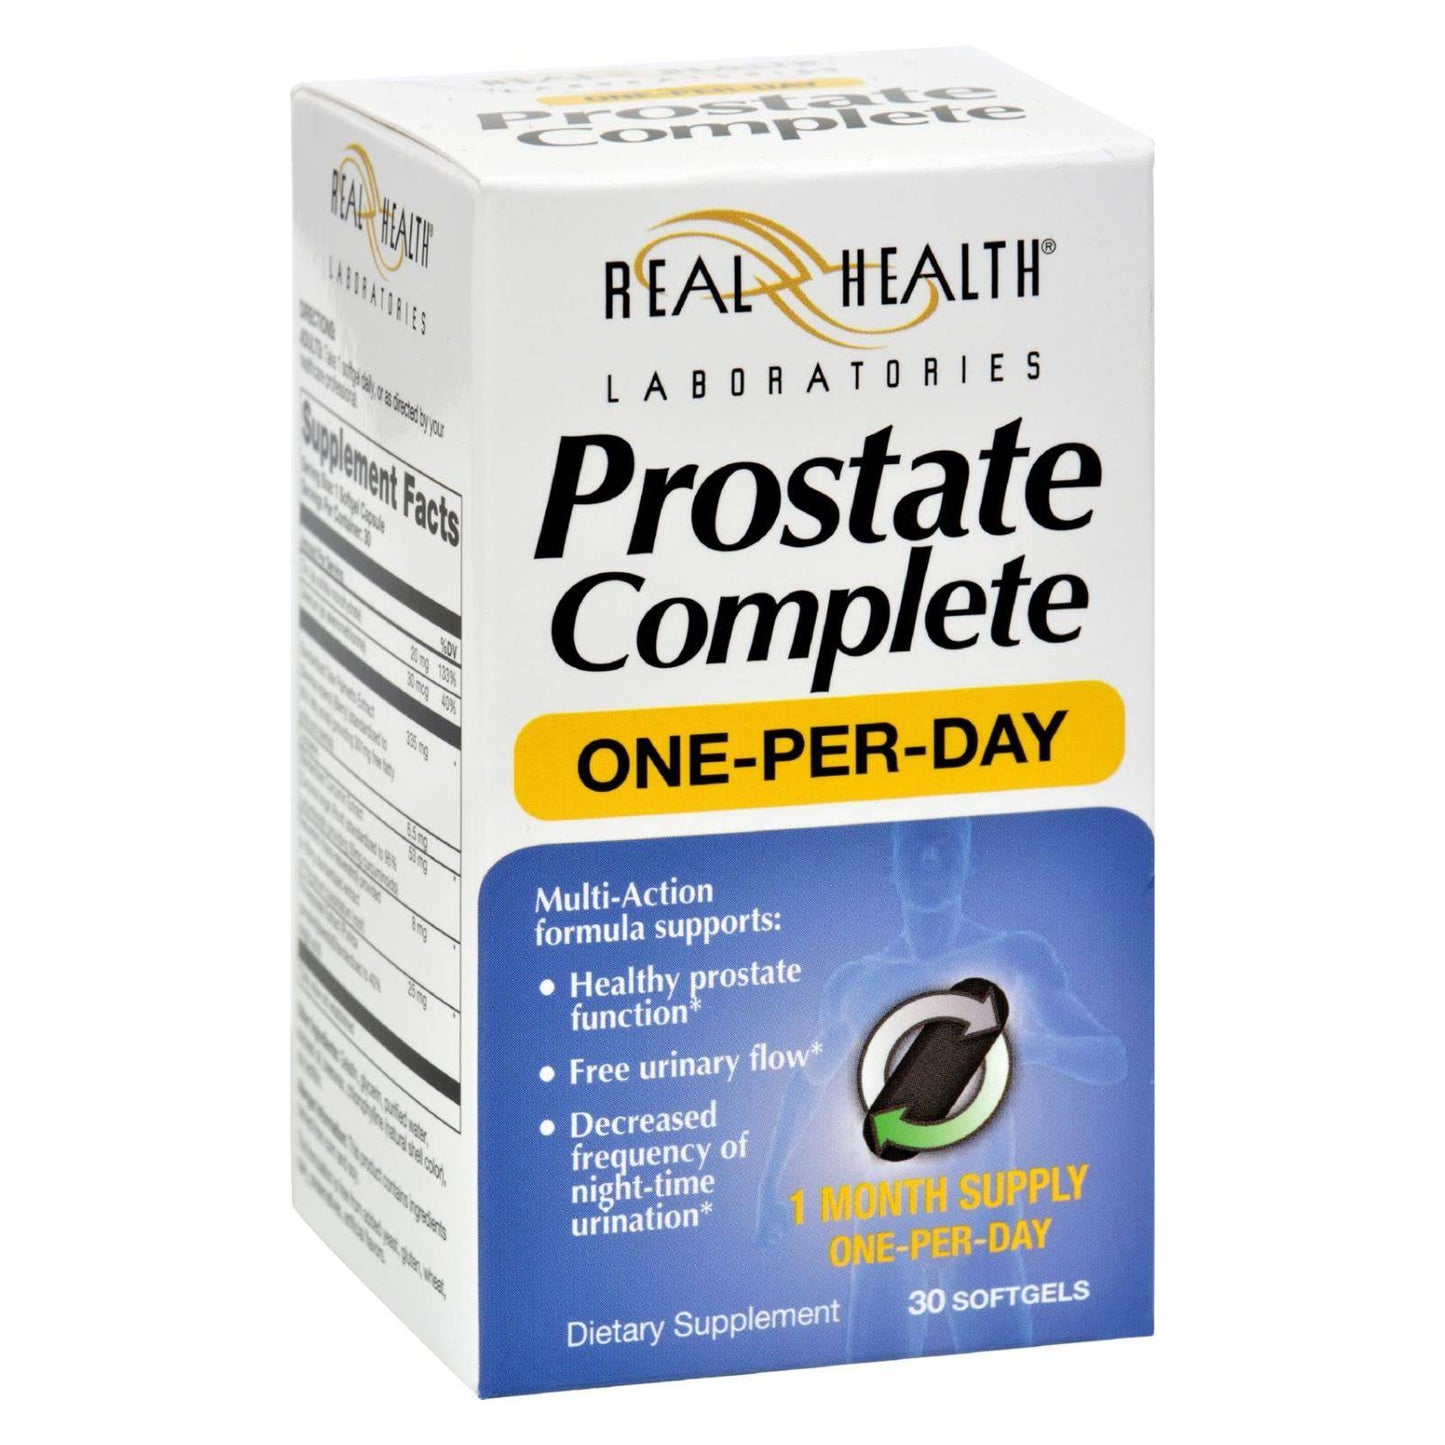 Buy Real Health Prostate Complete - 30 Softgels  at OnlyNaturals.us